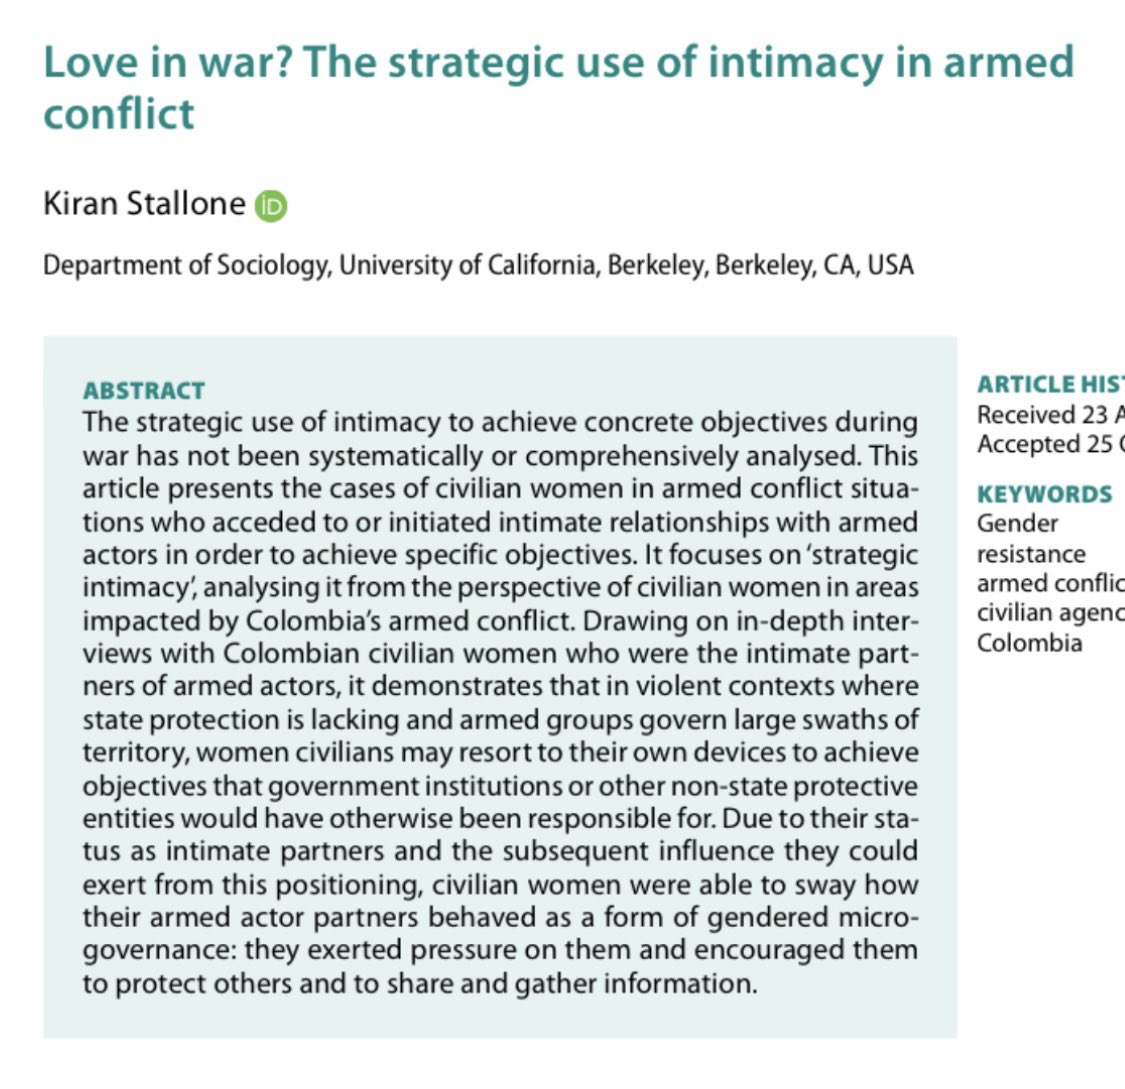 📘📚The first article from my dissertation is now available Open Access via the link below. The article examines how women in armed conflict scenarios strategically use intimacy to achieve individual and community-level objectives. Please read and share if you find it useful ☺️